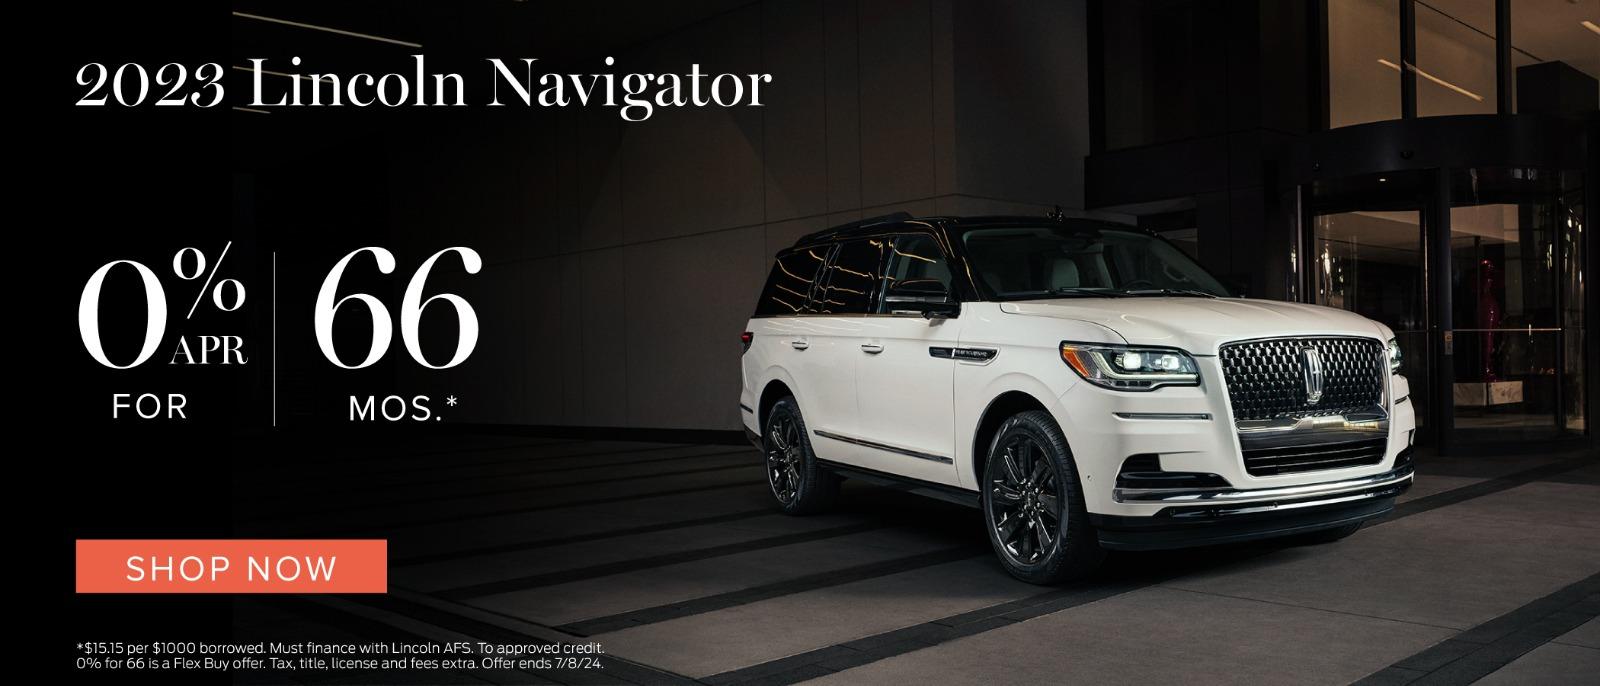 2023 Lincoln Navigator 0% APR for 66 months